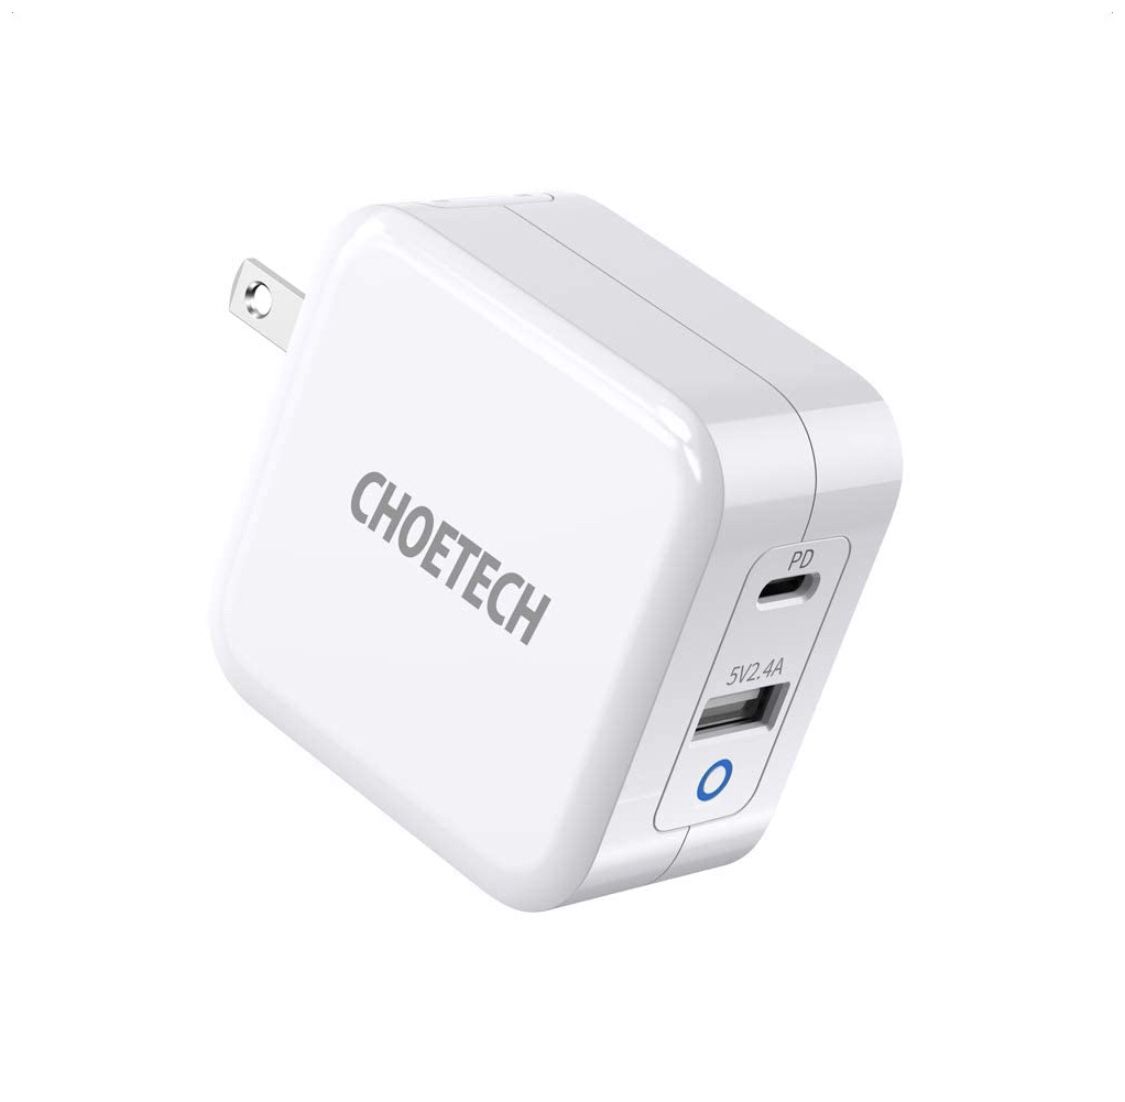 USB C Charger, CHOETECH 65W 2-Port PD Charger GaN Tech PD 3.0 Foldable Type C Wall Charger Adapter Compatible with MacBook Pro/Air, iPad Pro, iPhone